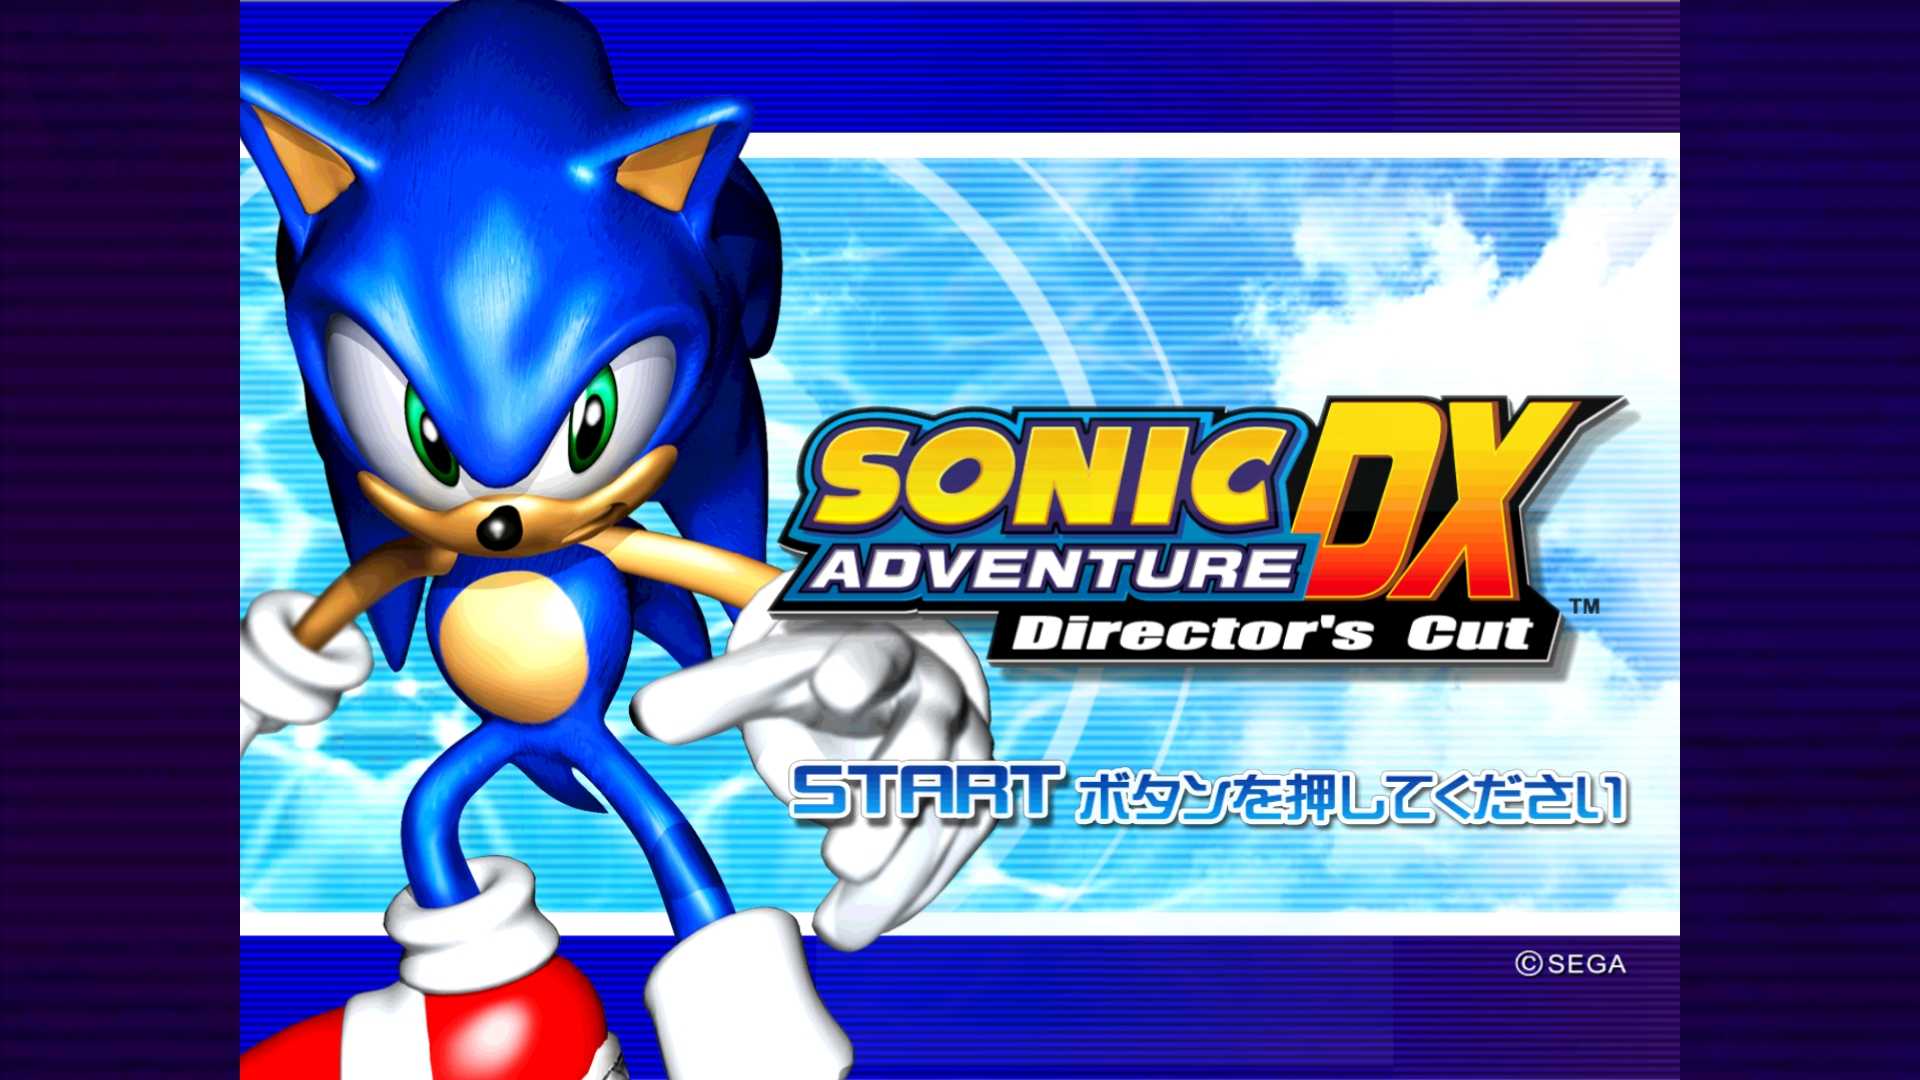 Steam 版 Sonic Adventure Dx 日本語化メモ Sadx Mod Manager Dreamcast Collection Awgs Foundry